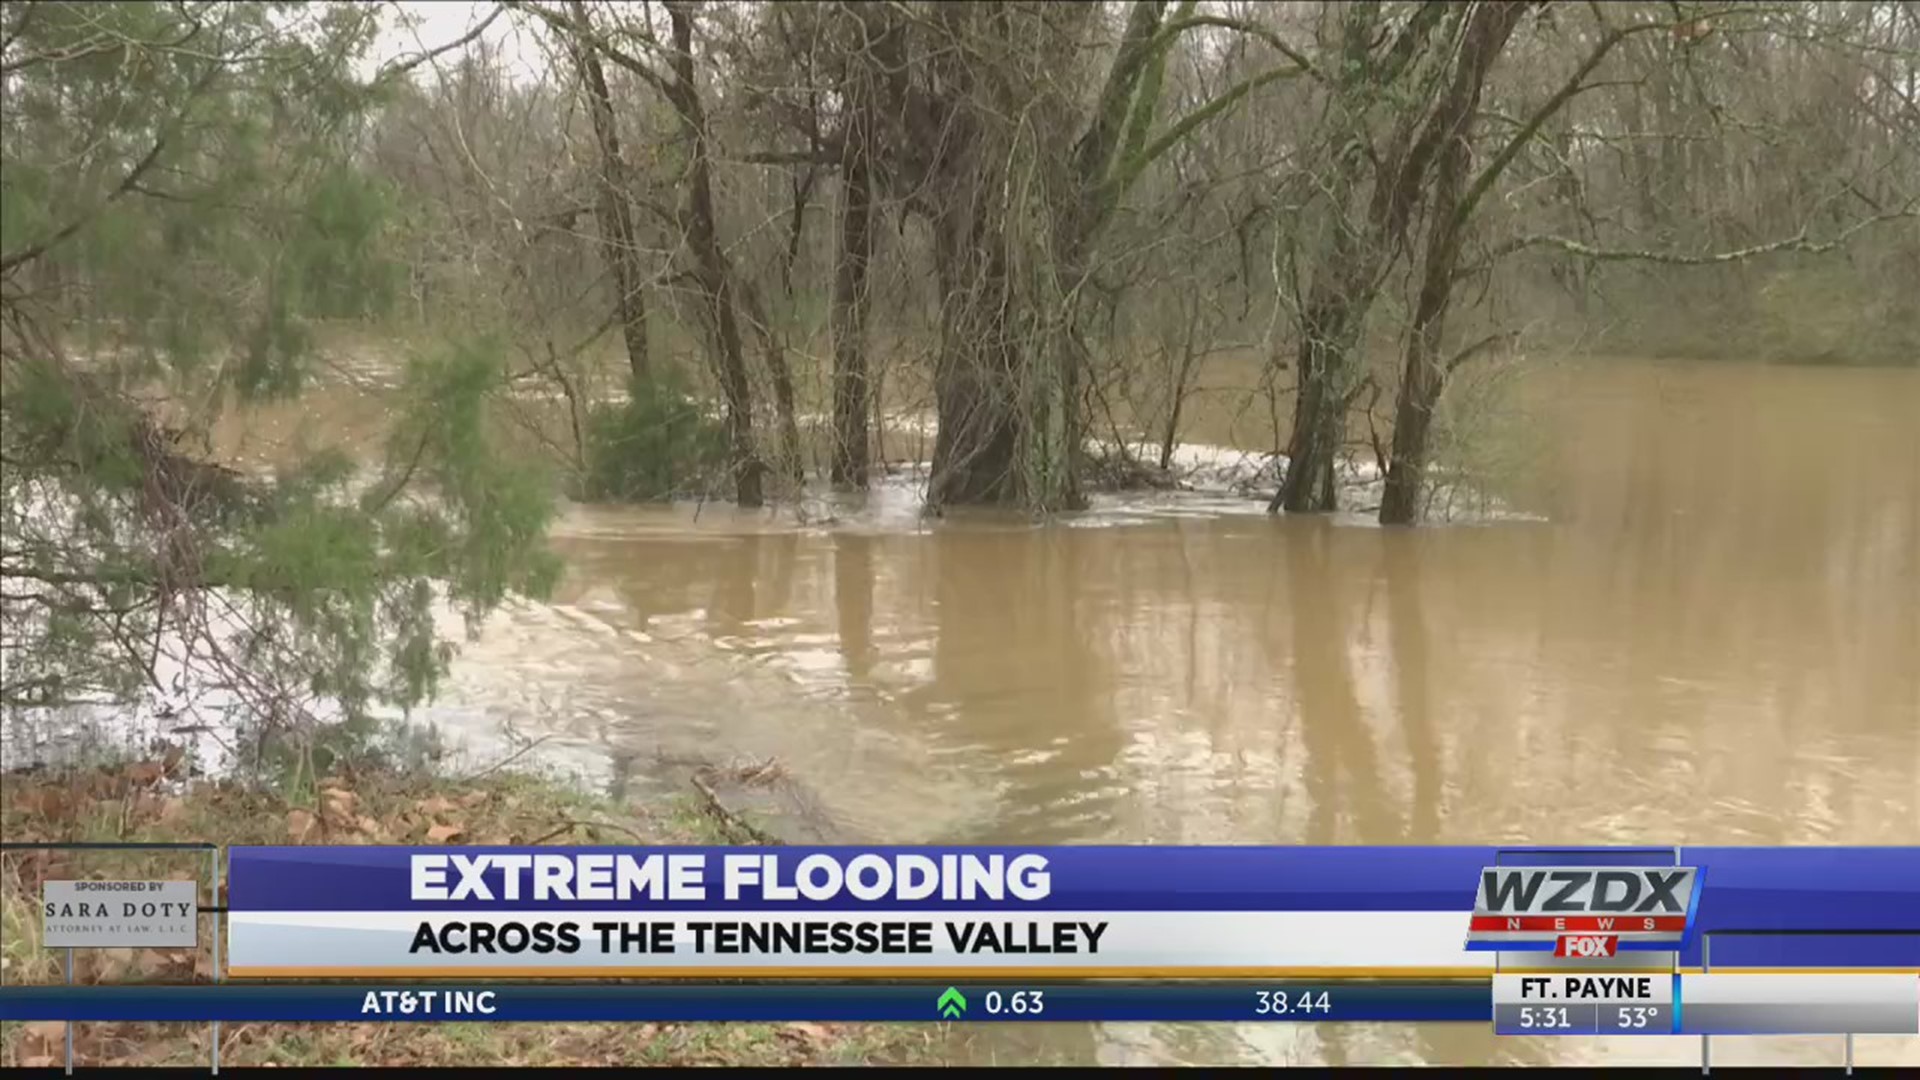 Flooding continues across the Tennessee Valley.